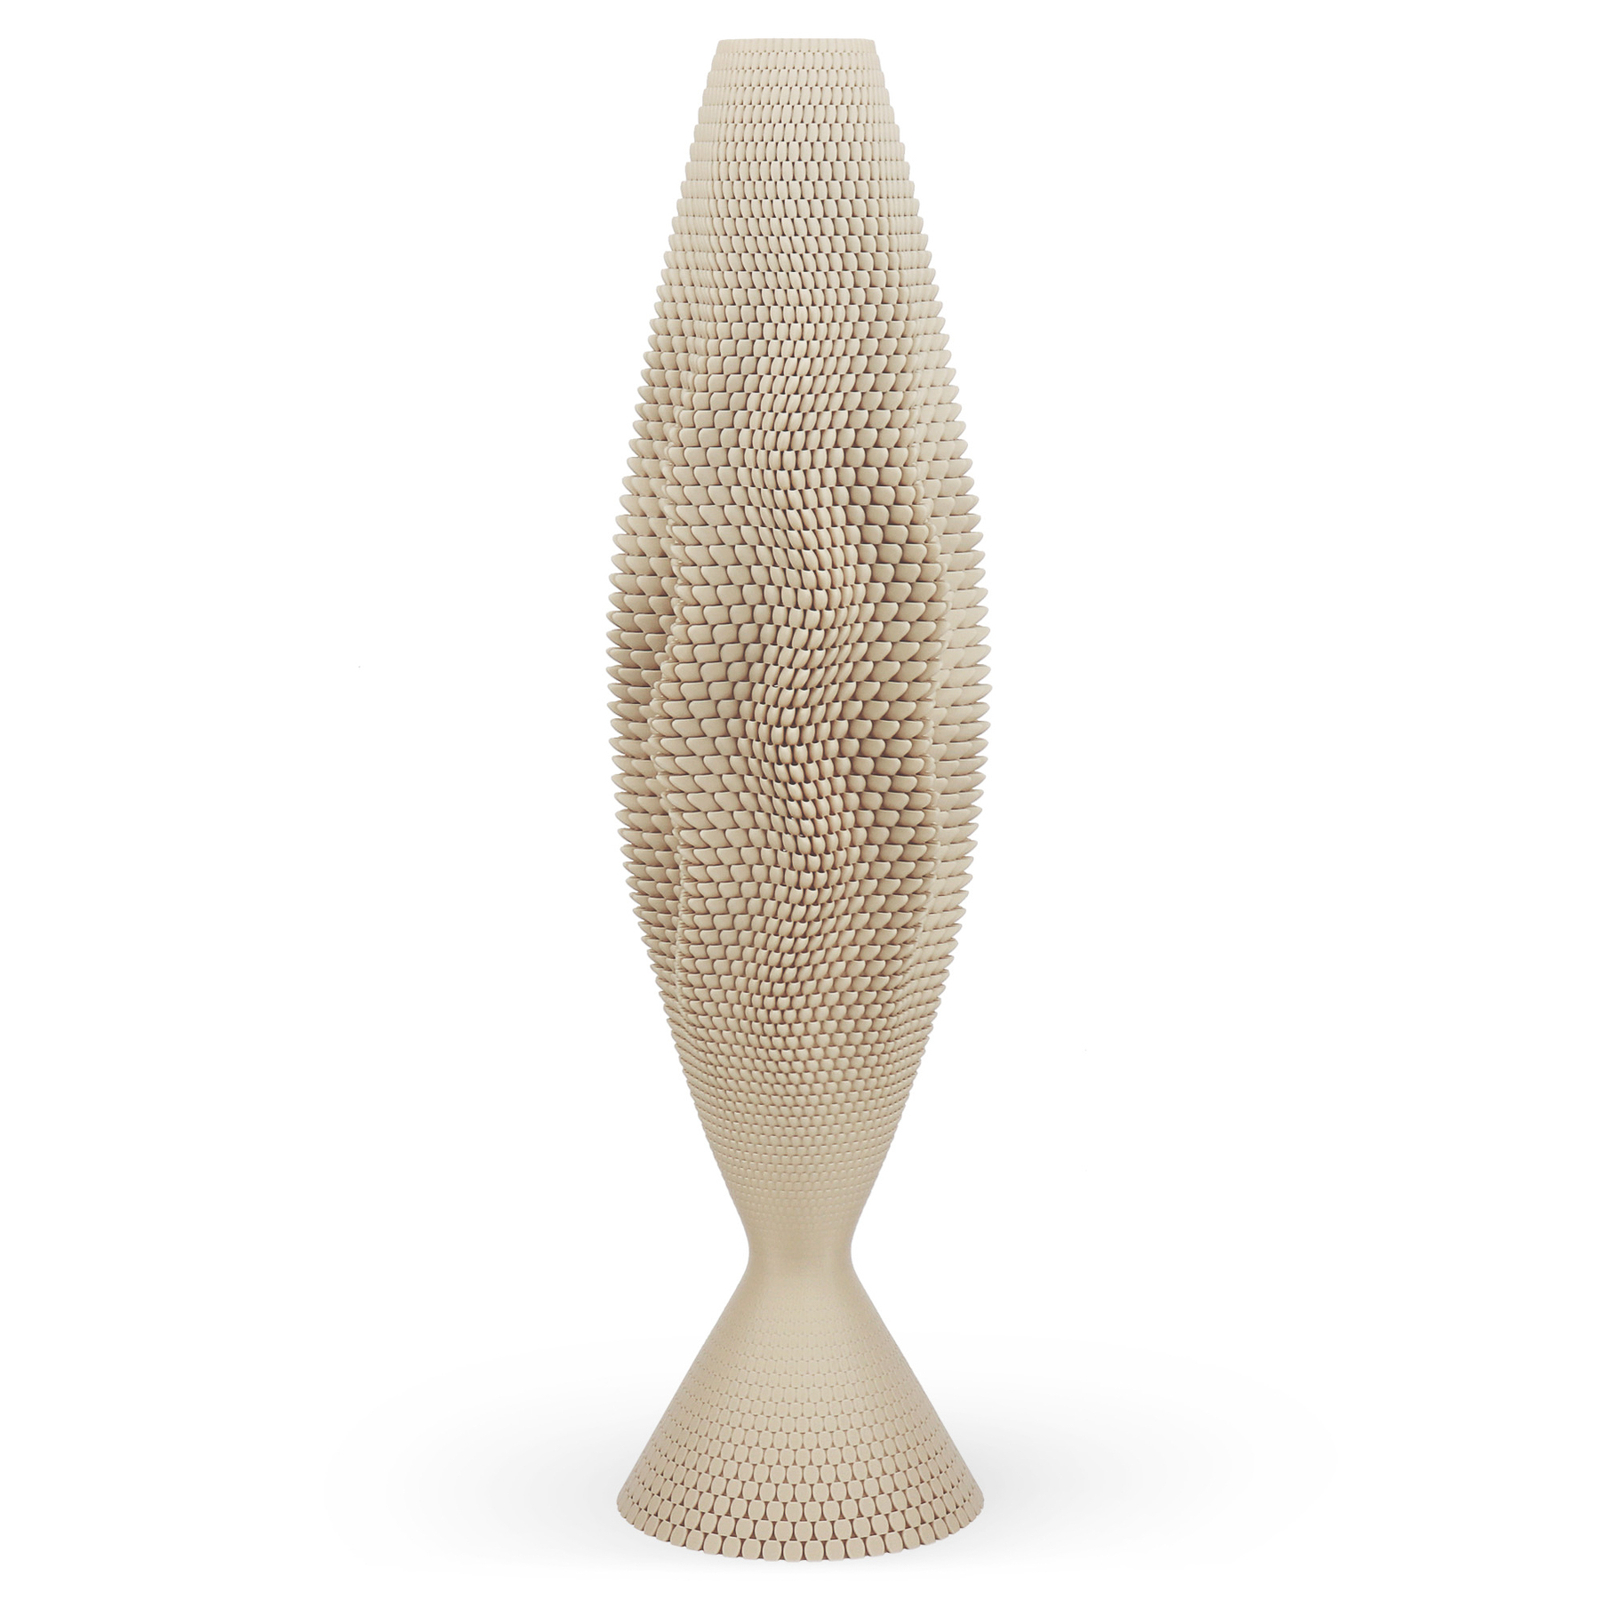 Koral table lamp made of organic material, Lines, 65 cm